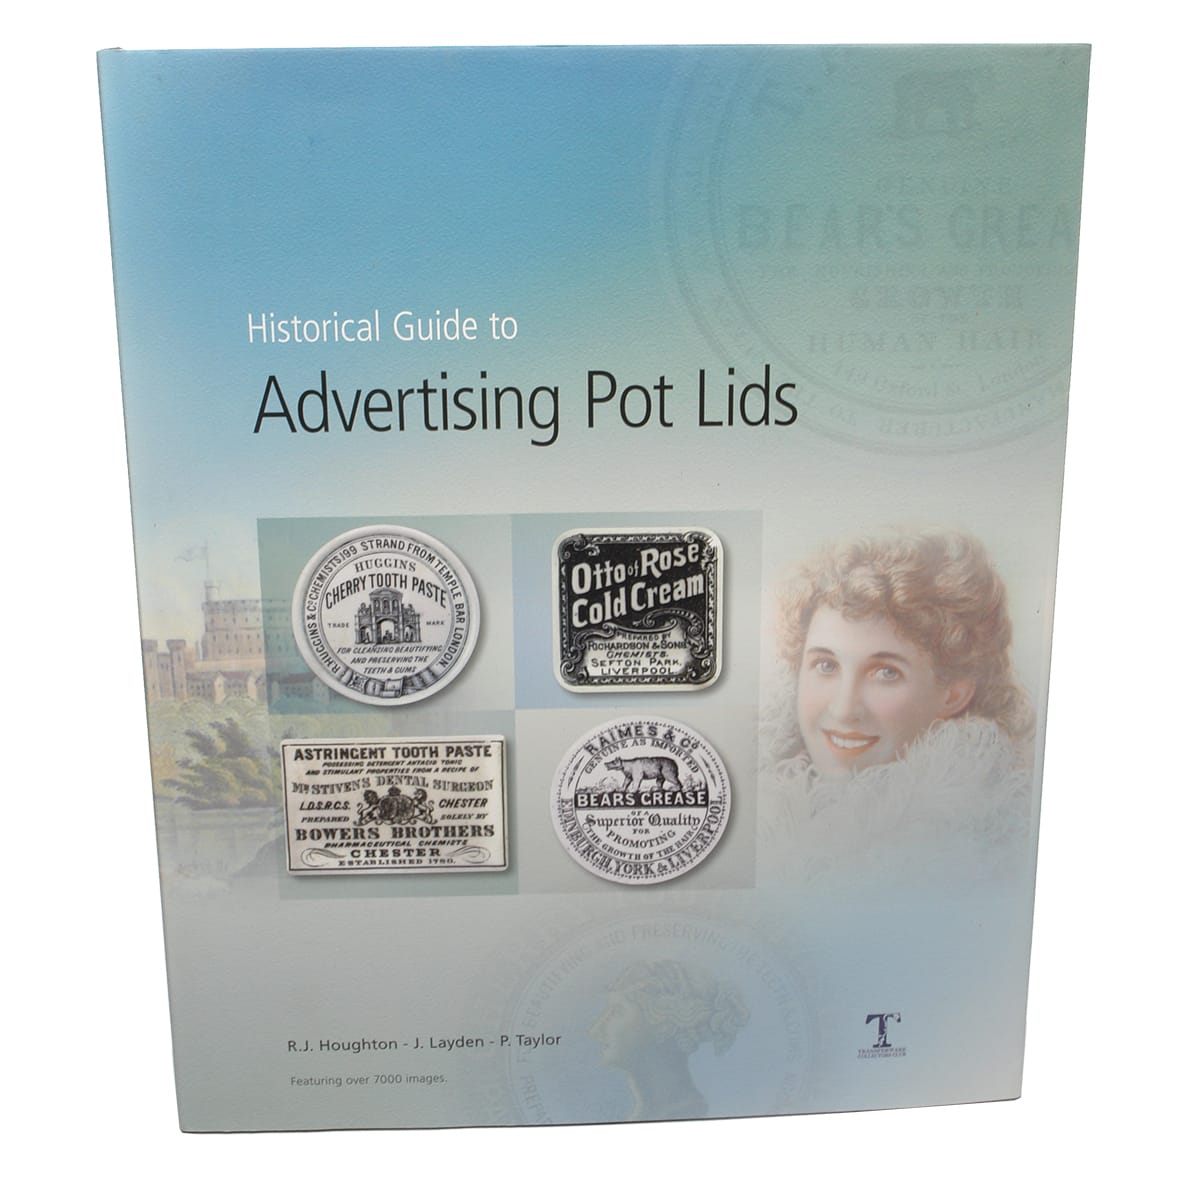 Book. Historical Guide to Advertising Pot Lids.